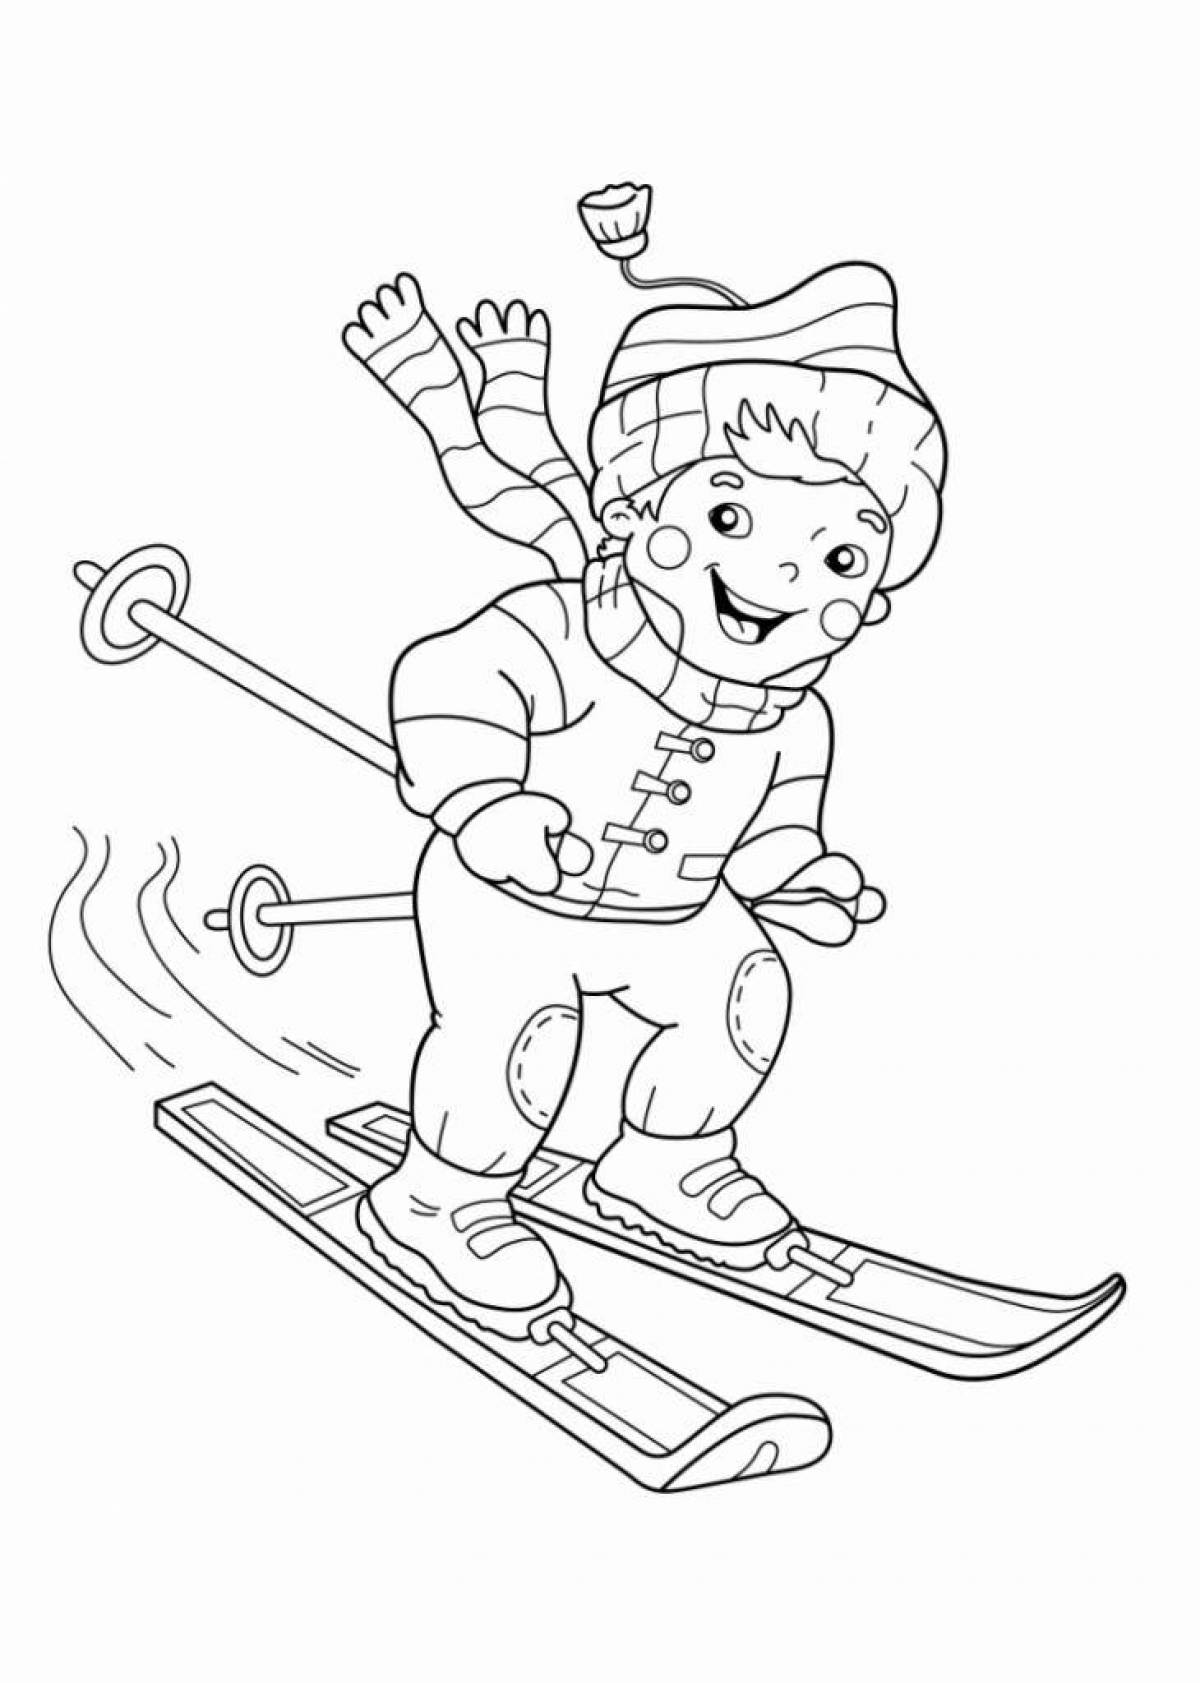 Cute winter sports coloring pages for preschoolers